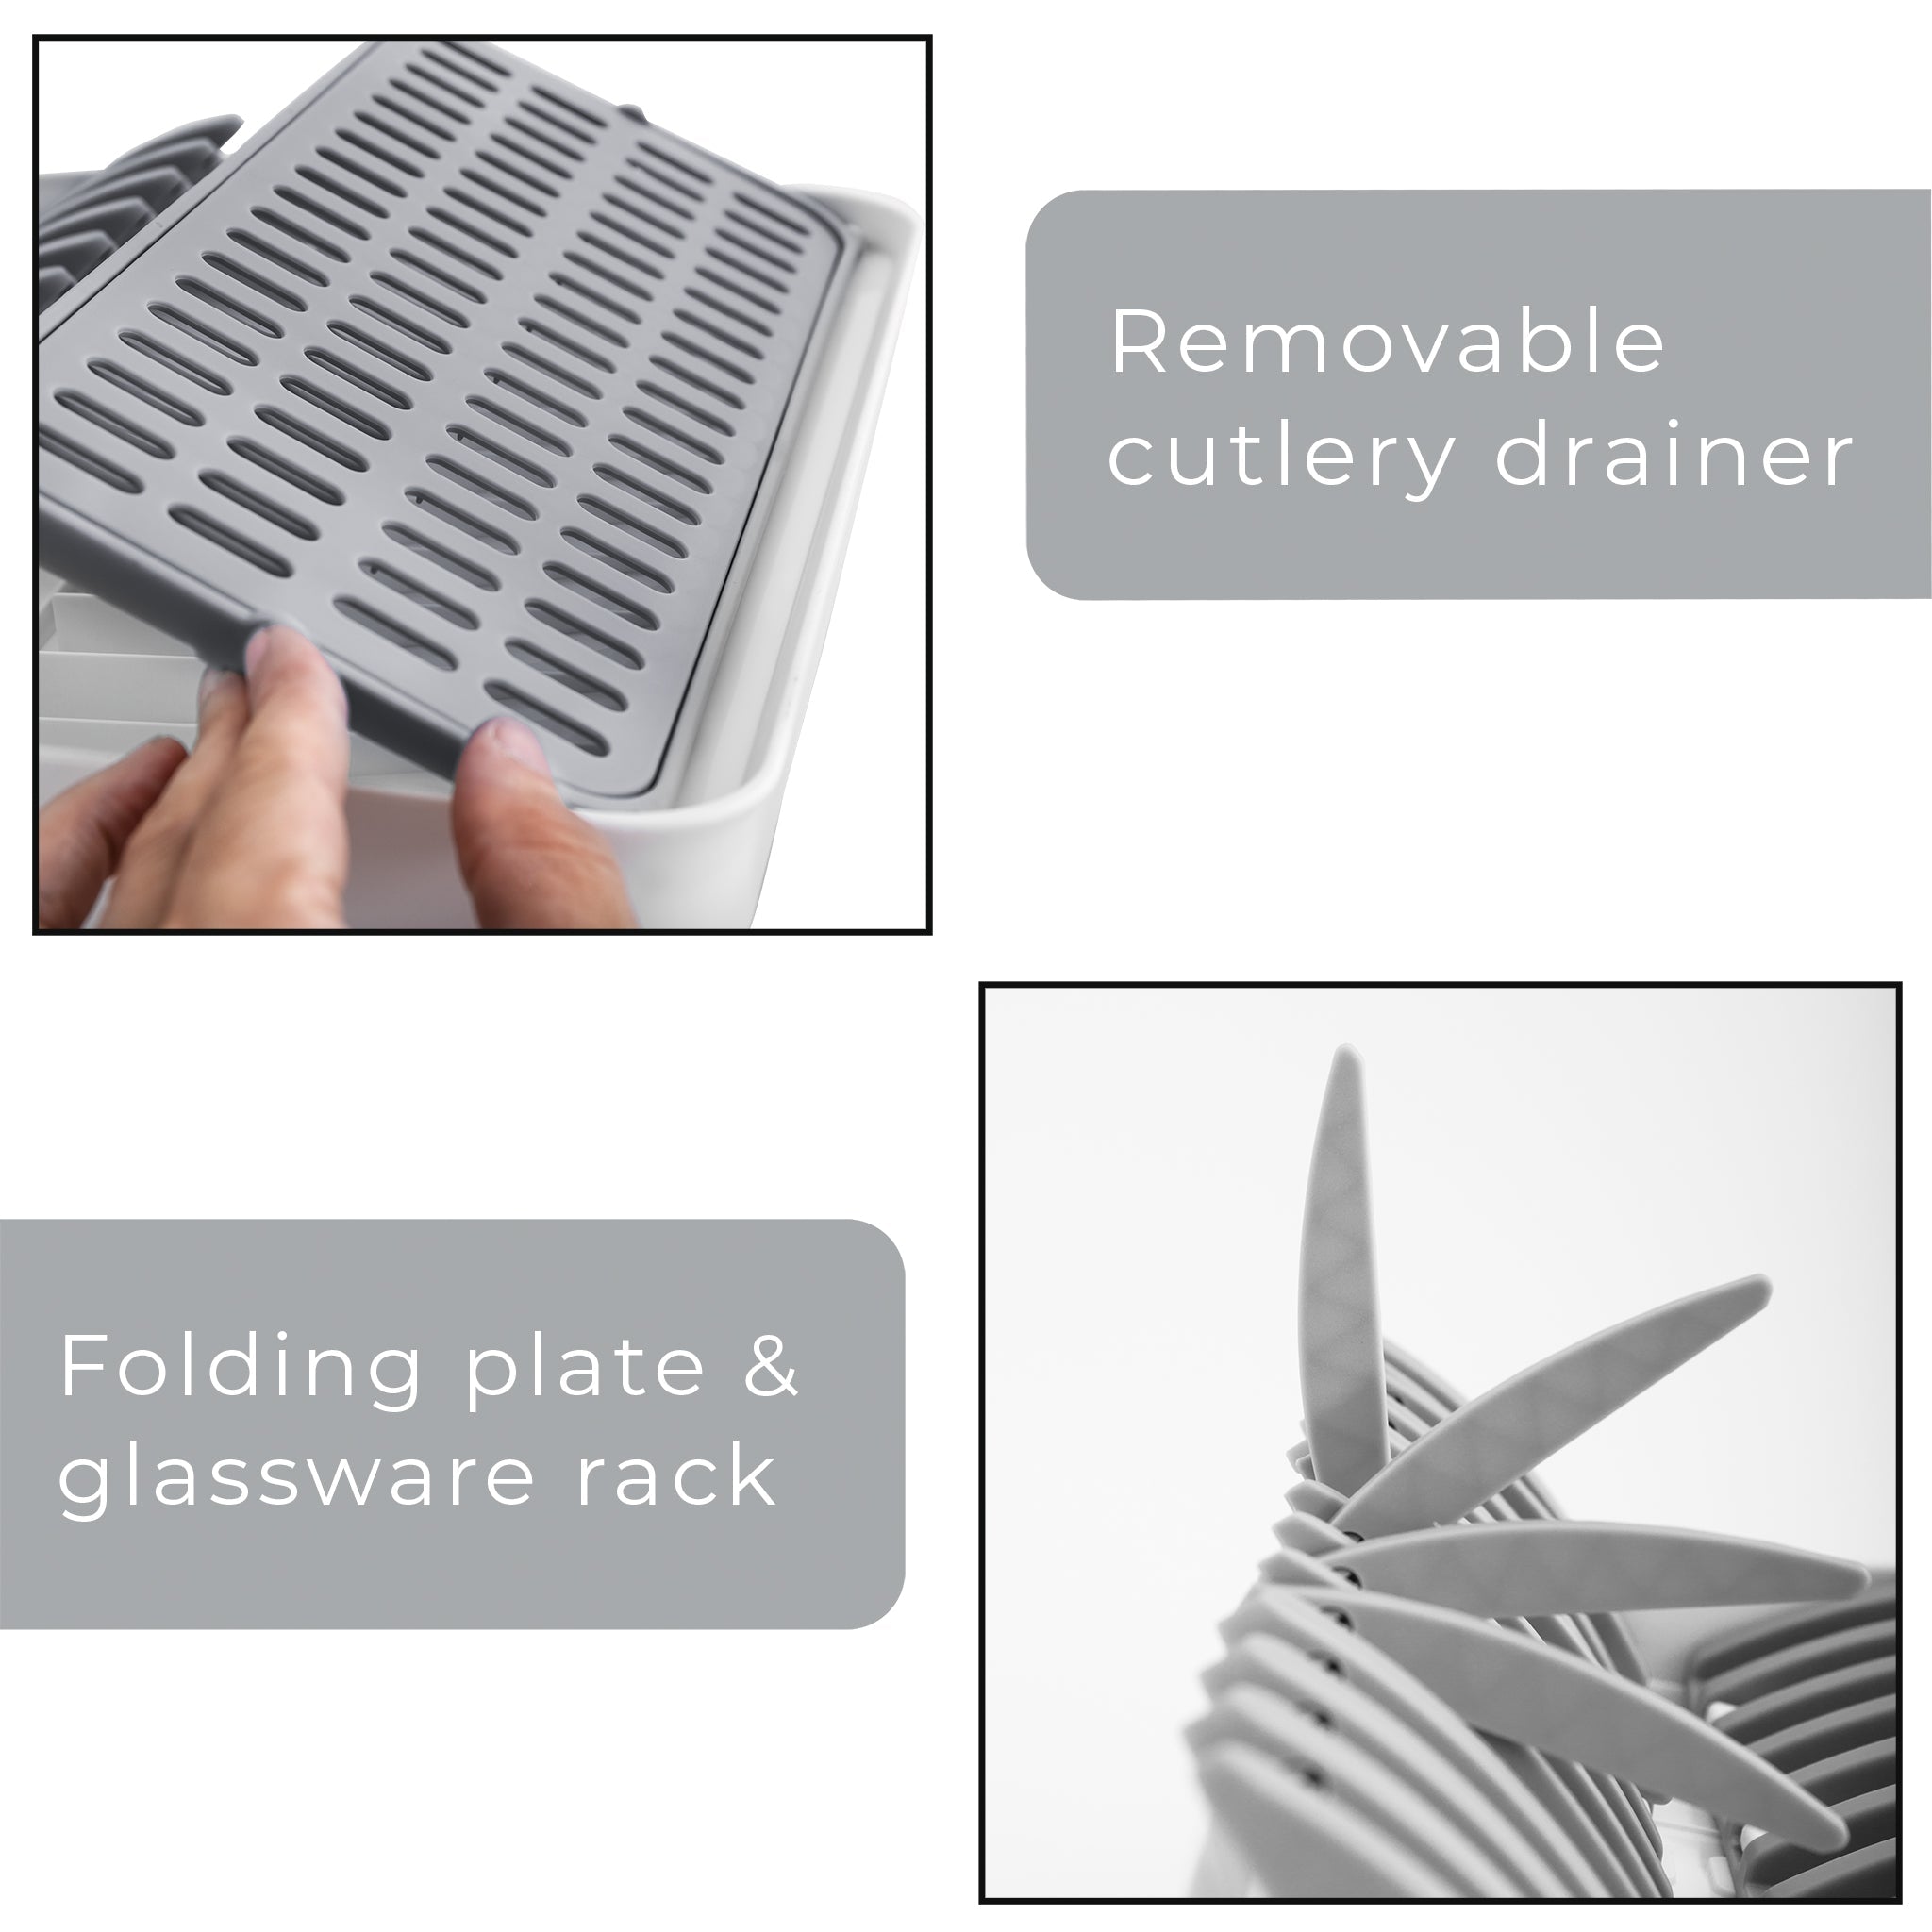 Sammart Expandable & Collapsible Dish Drainer - Foldable Drying